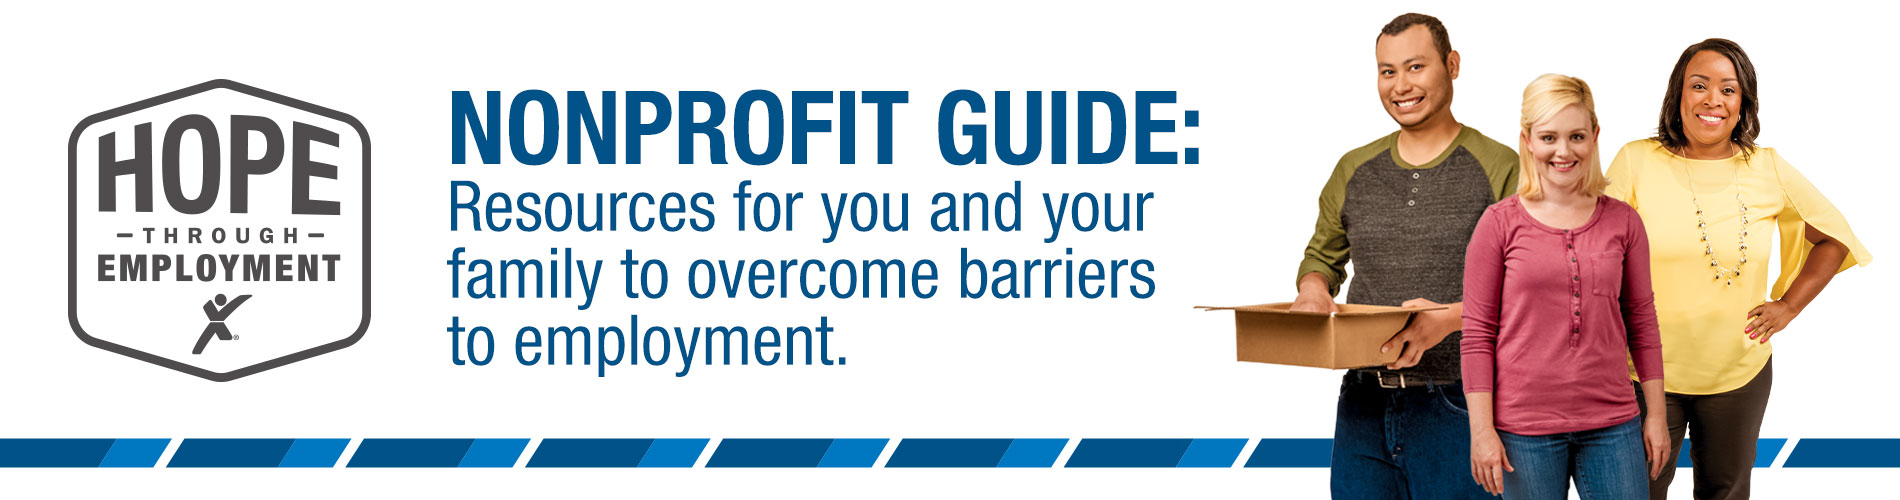 Nonprofit Guide Home Banner